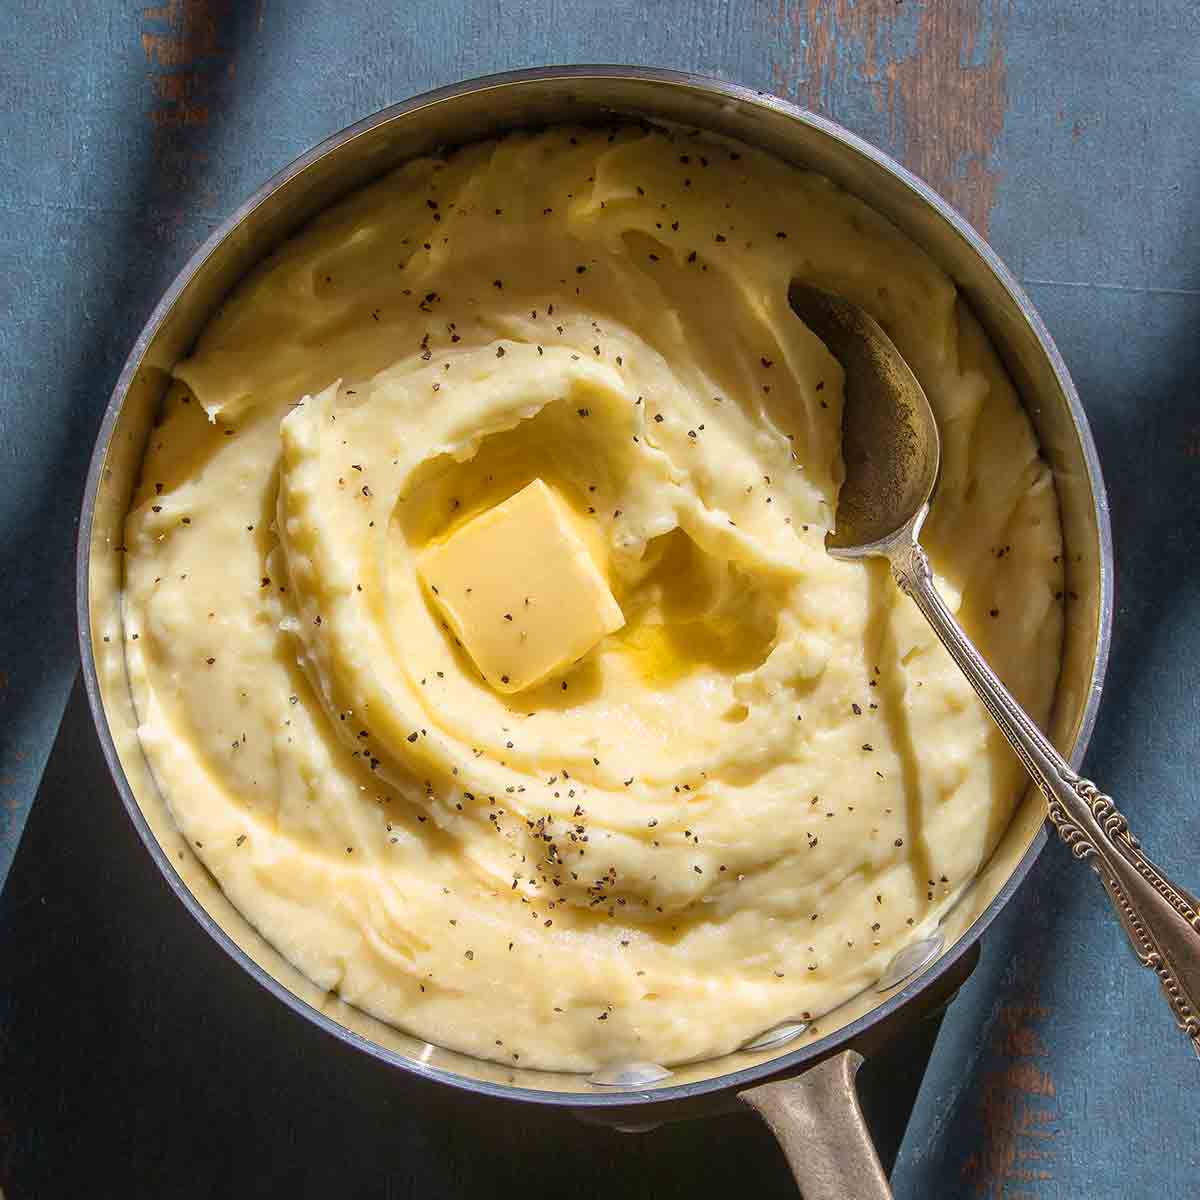 A saucepan filled with roasted garlic mashed potatoes with a pat of butter on top.